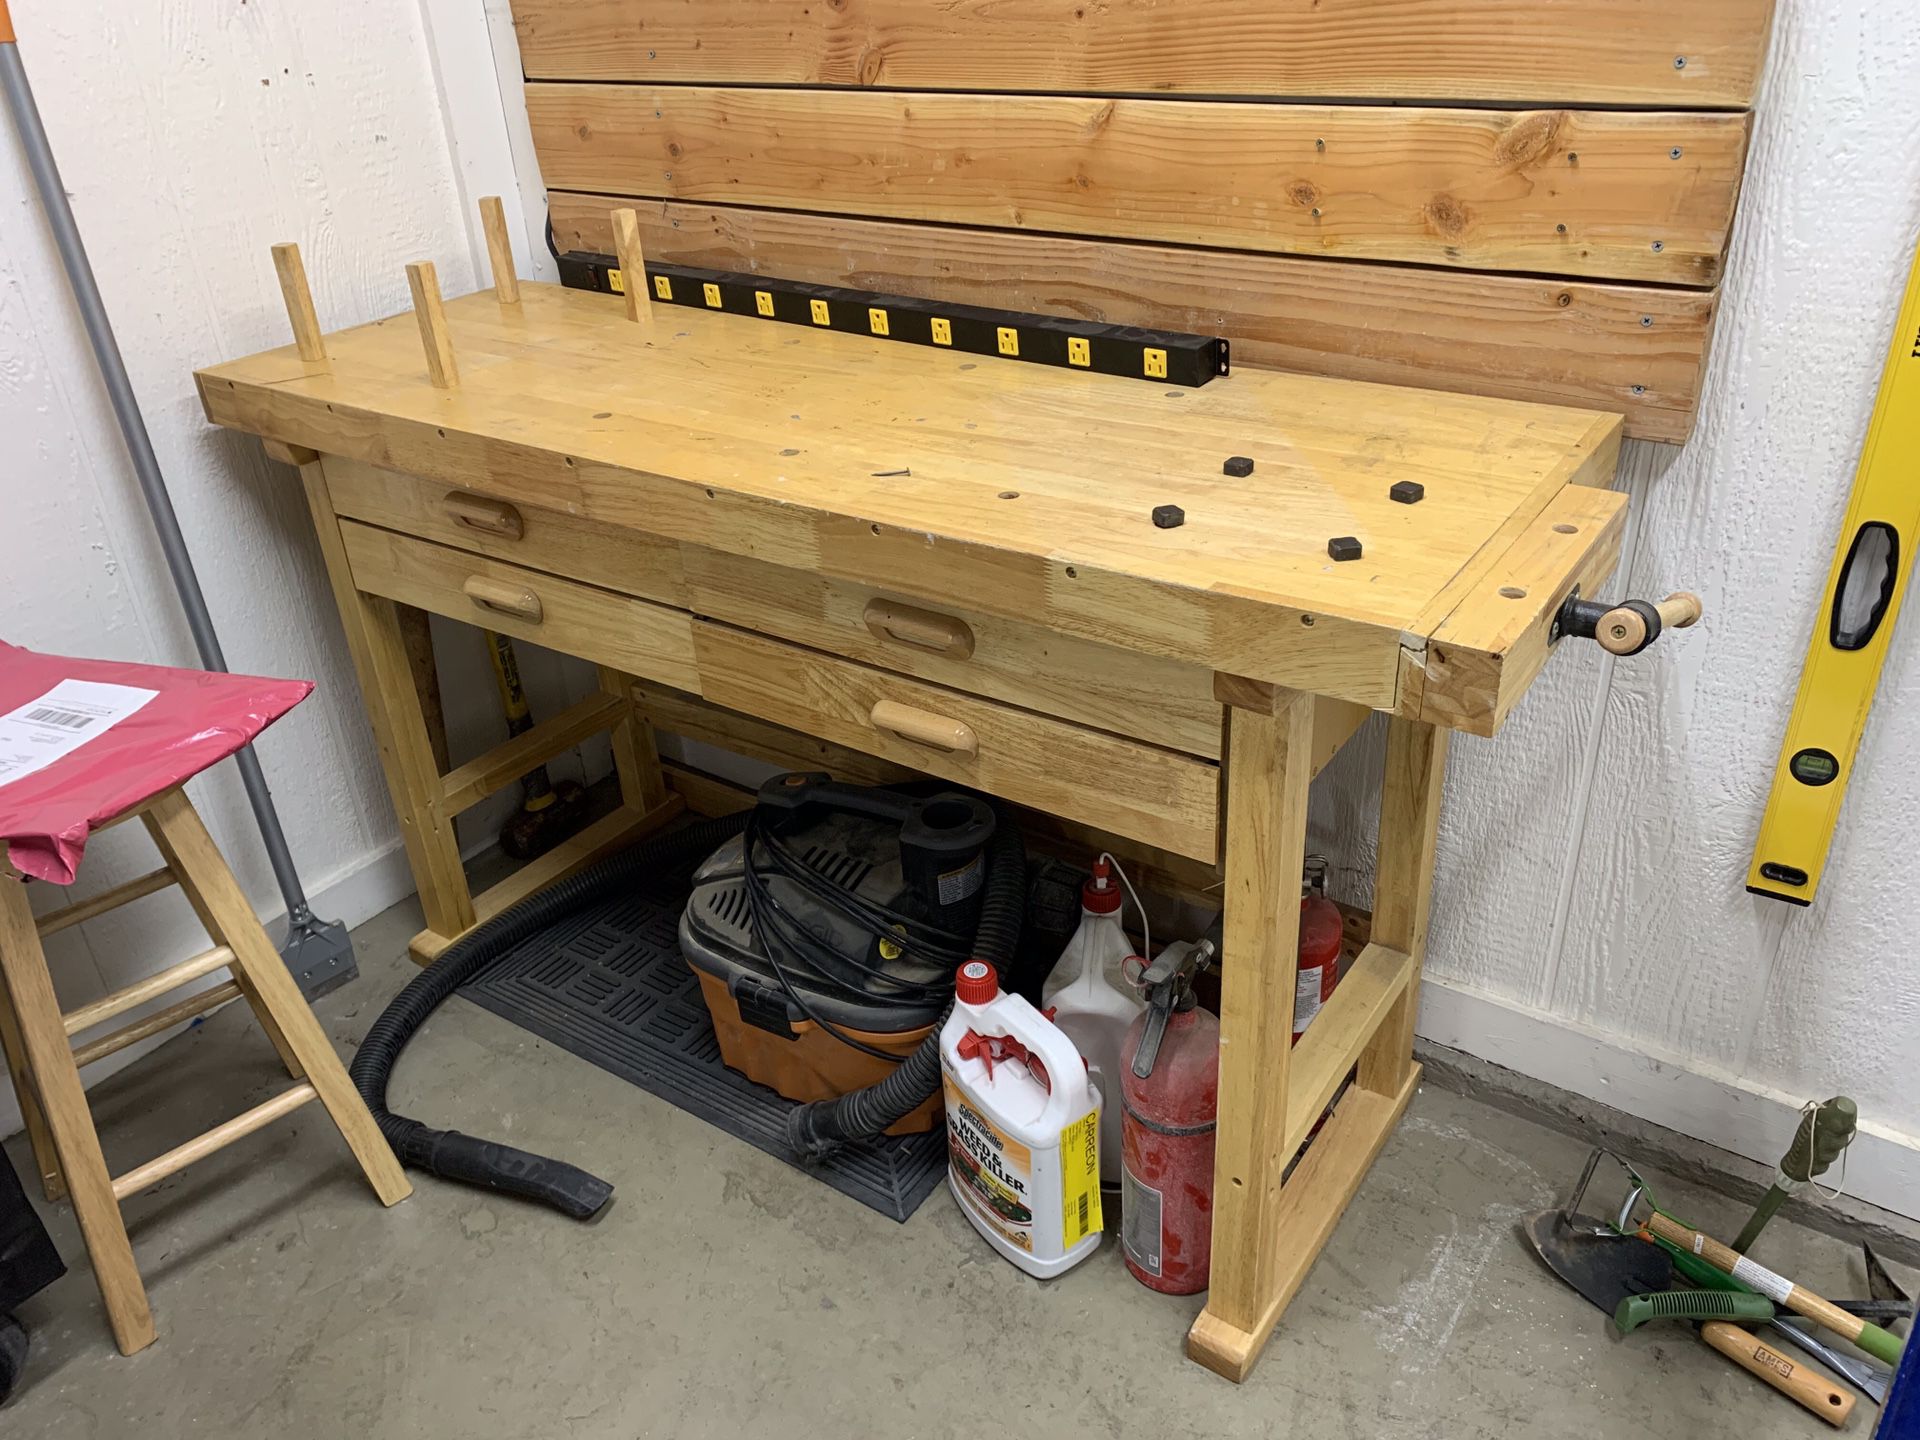 Workbench and stool